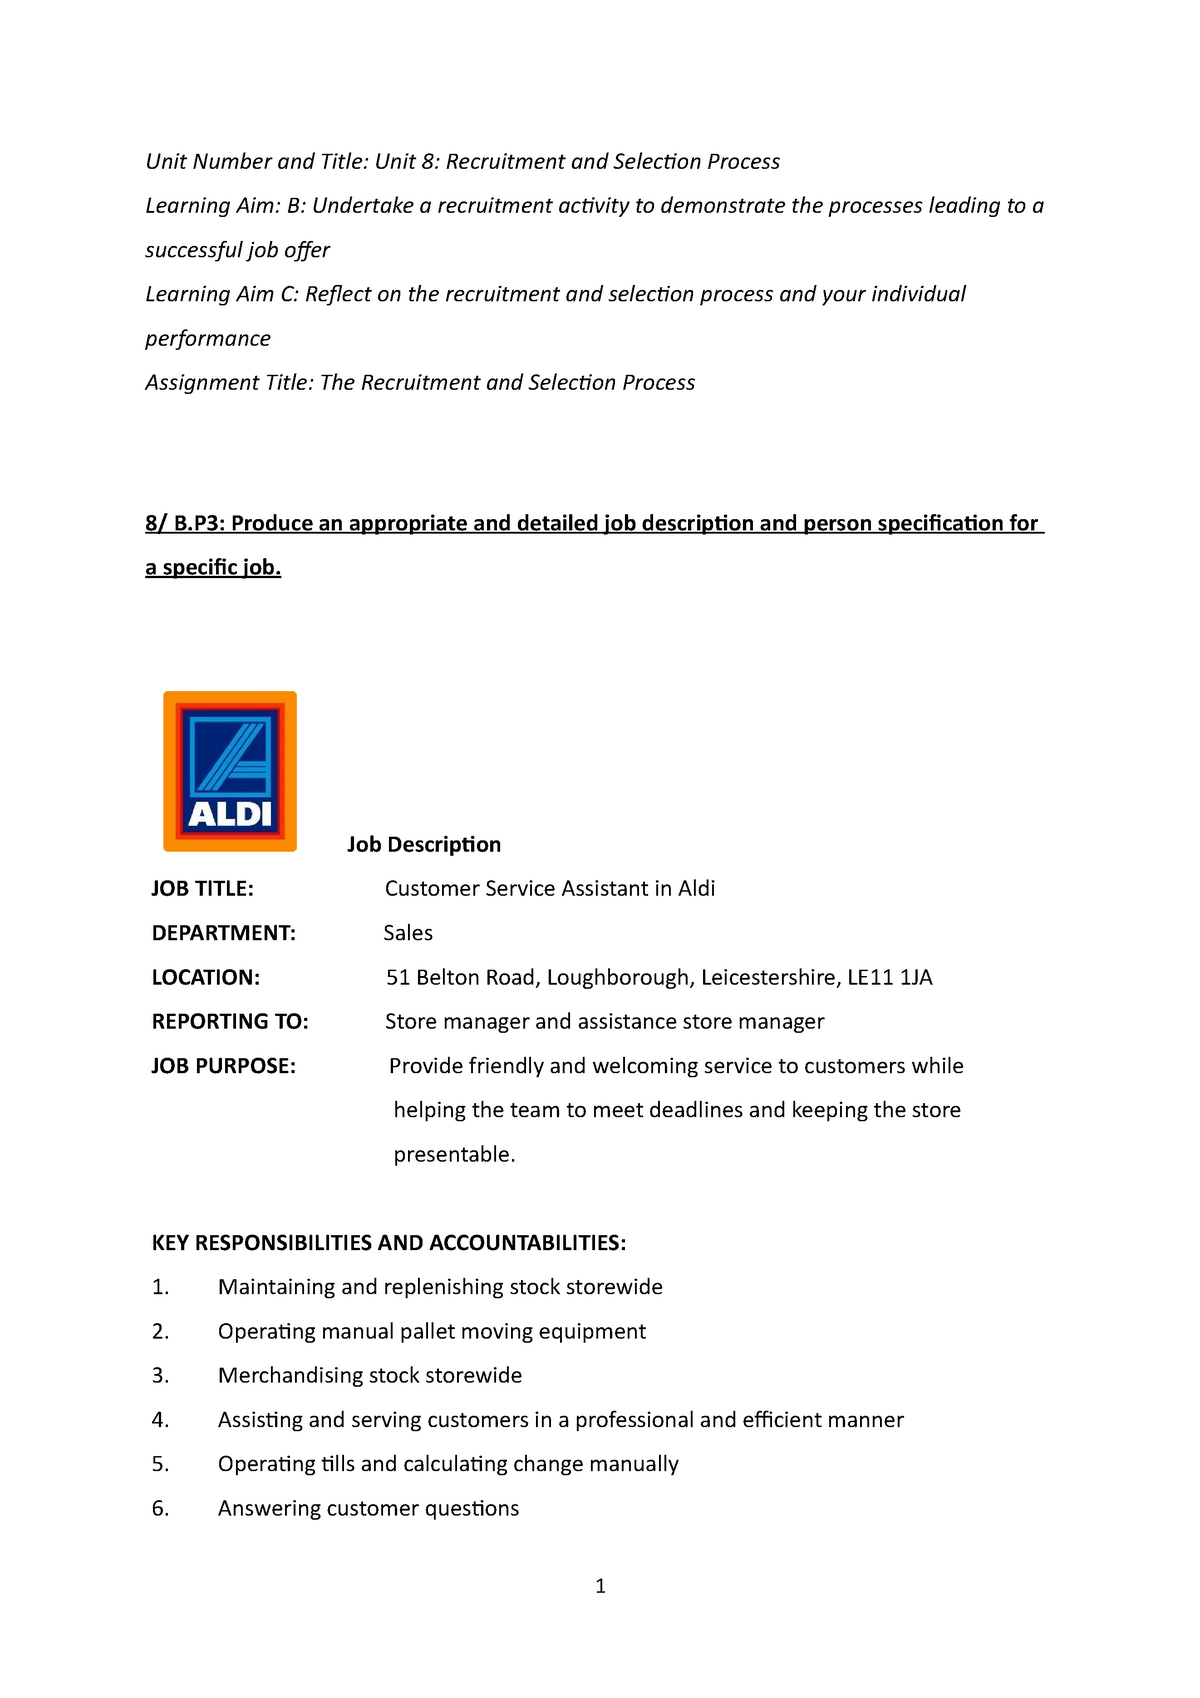 unit 8 recruitment and selection process assignment 2 tesco